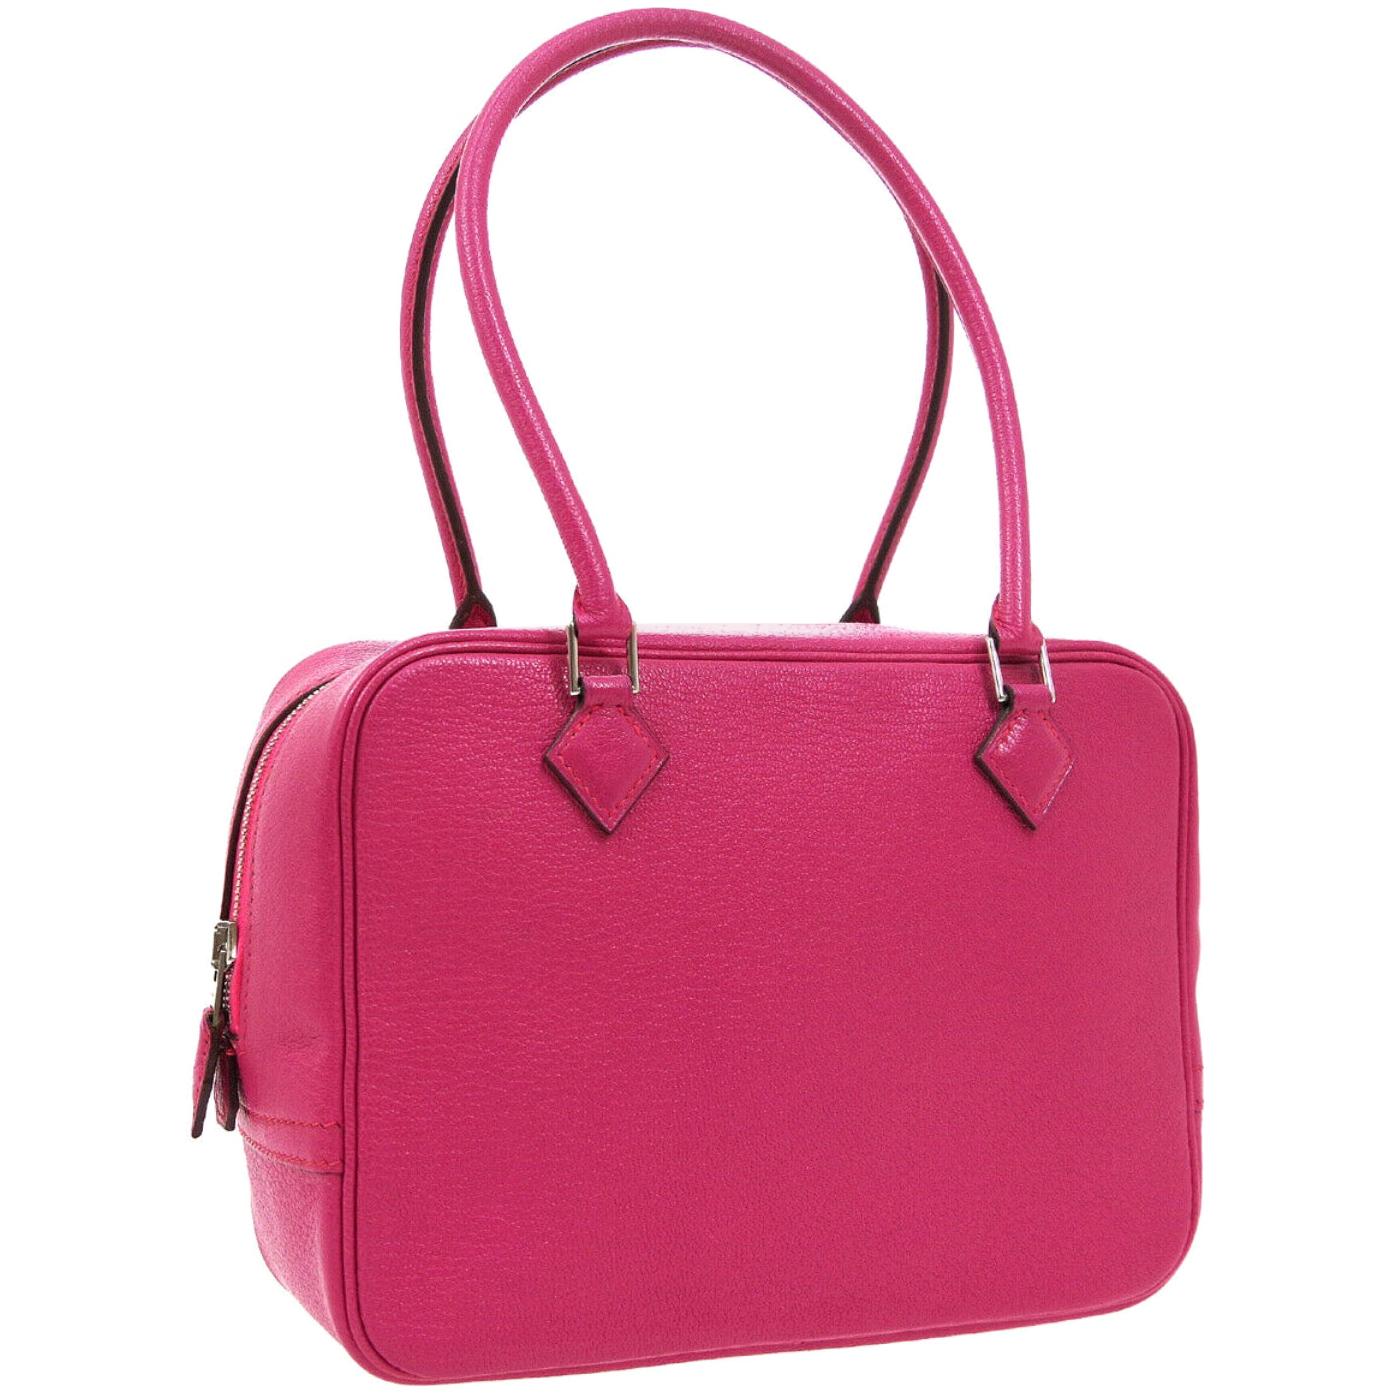 Hermes Hot Pink Fuchsia Leather Small Silver Evening Top Handle Satchel Bag